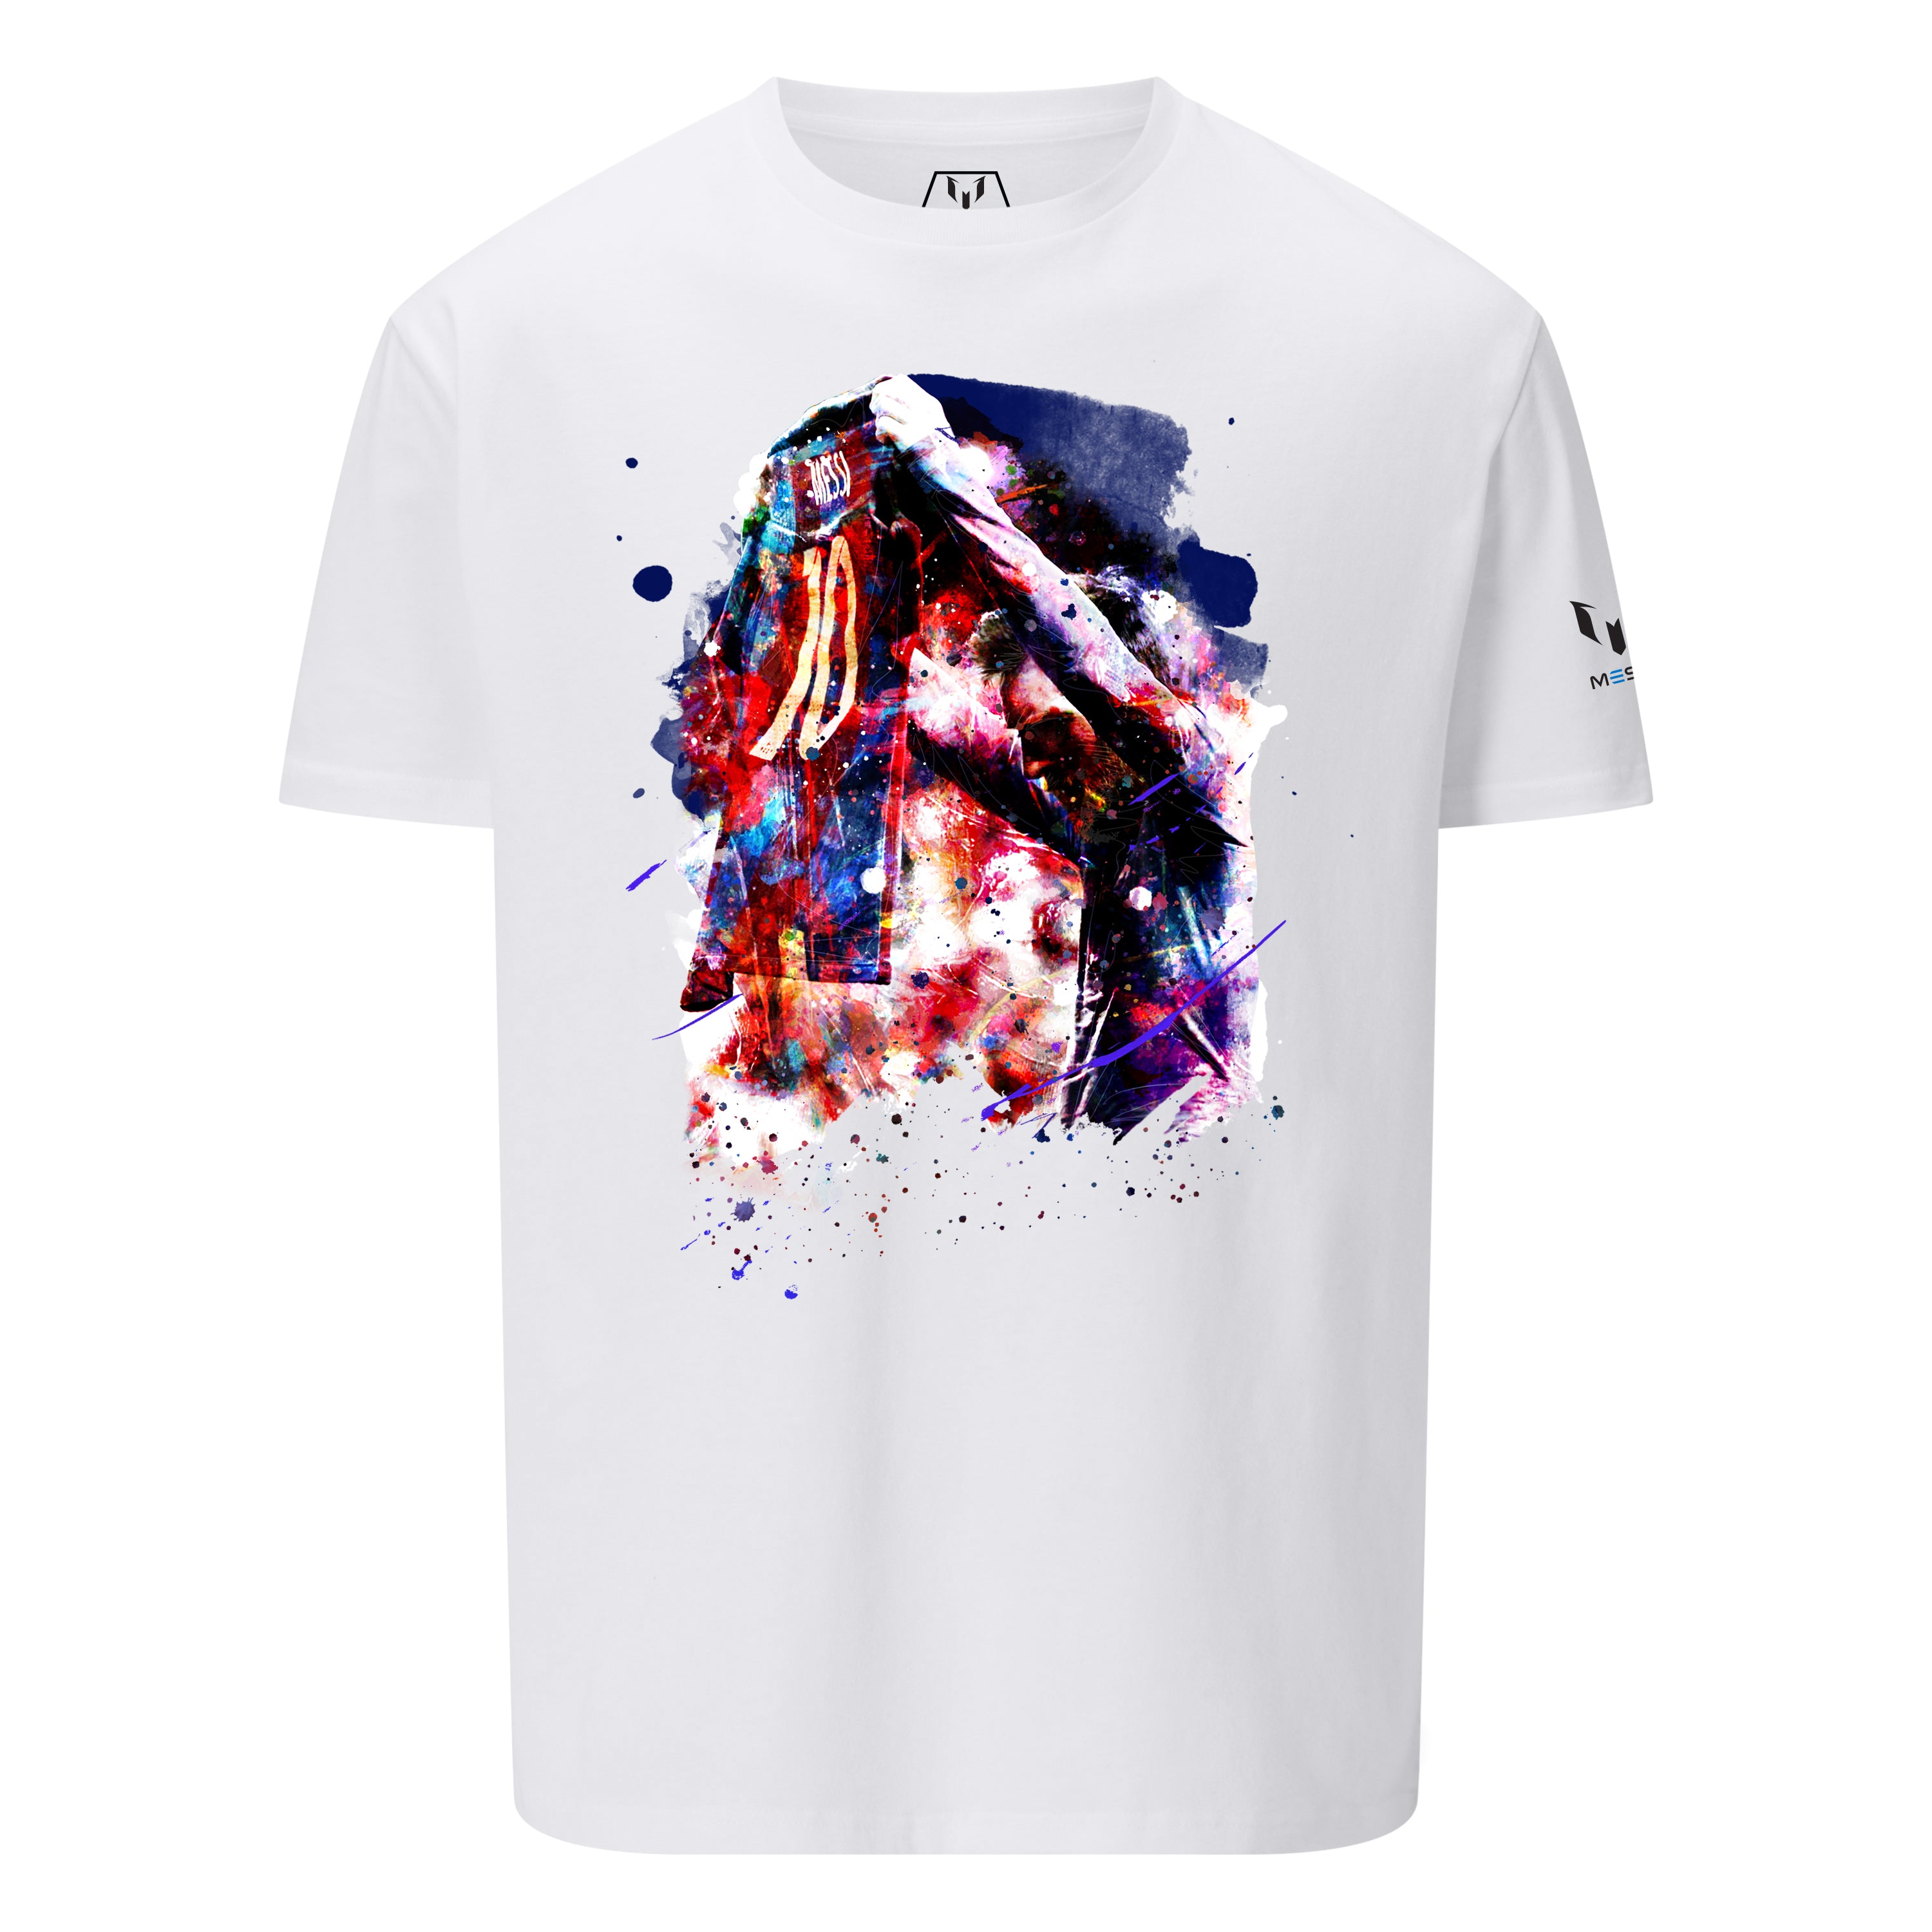 Shop Graphic T-Shirts at The Messi Store | The Messi Store